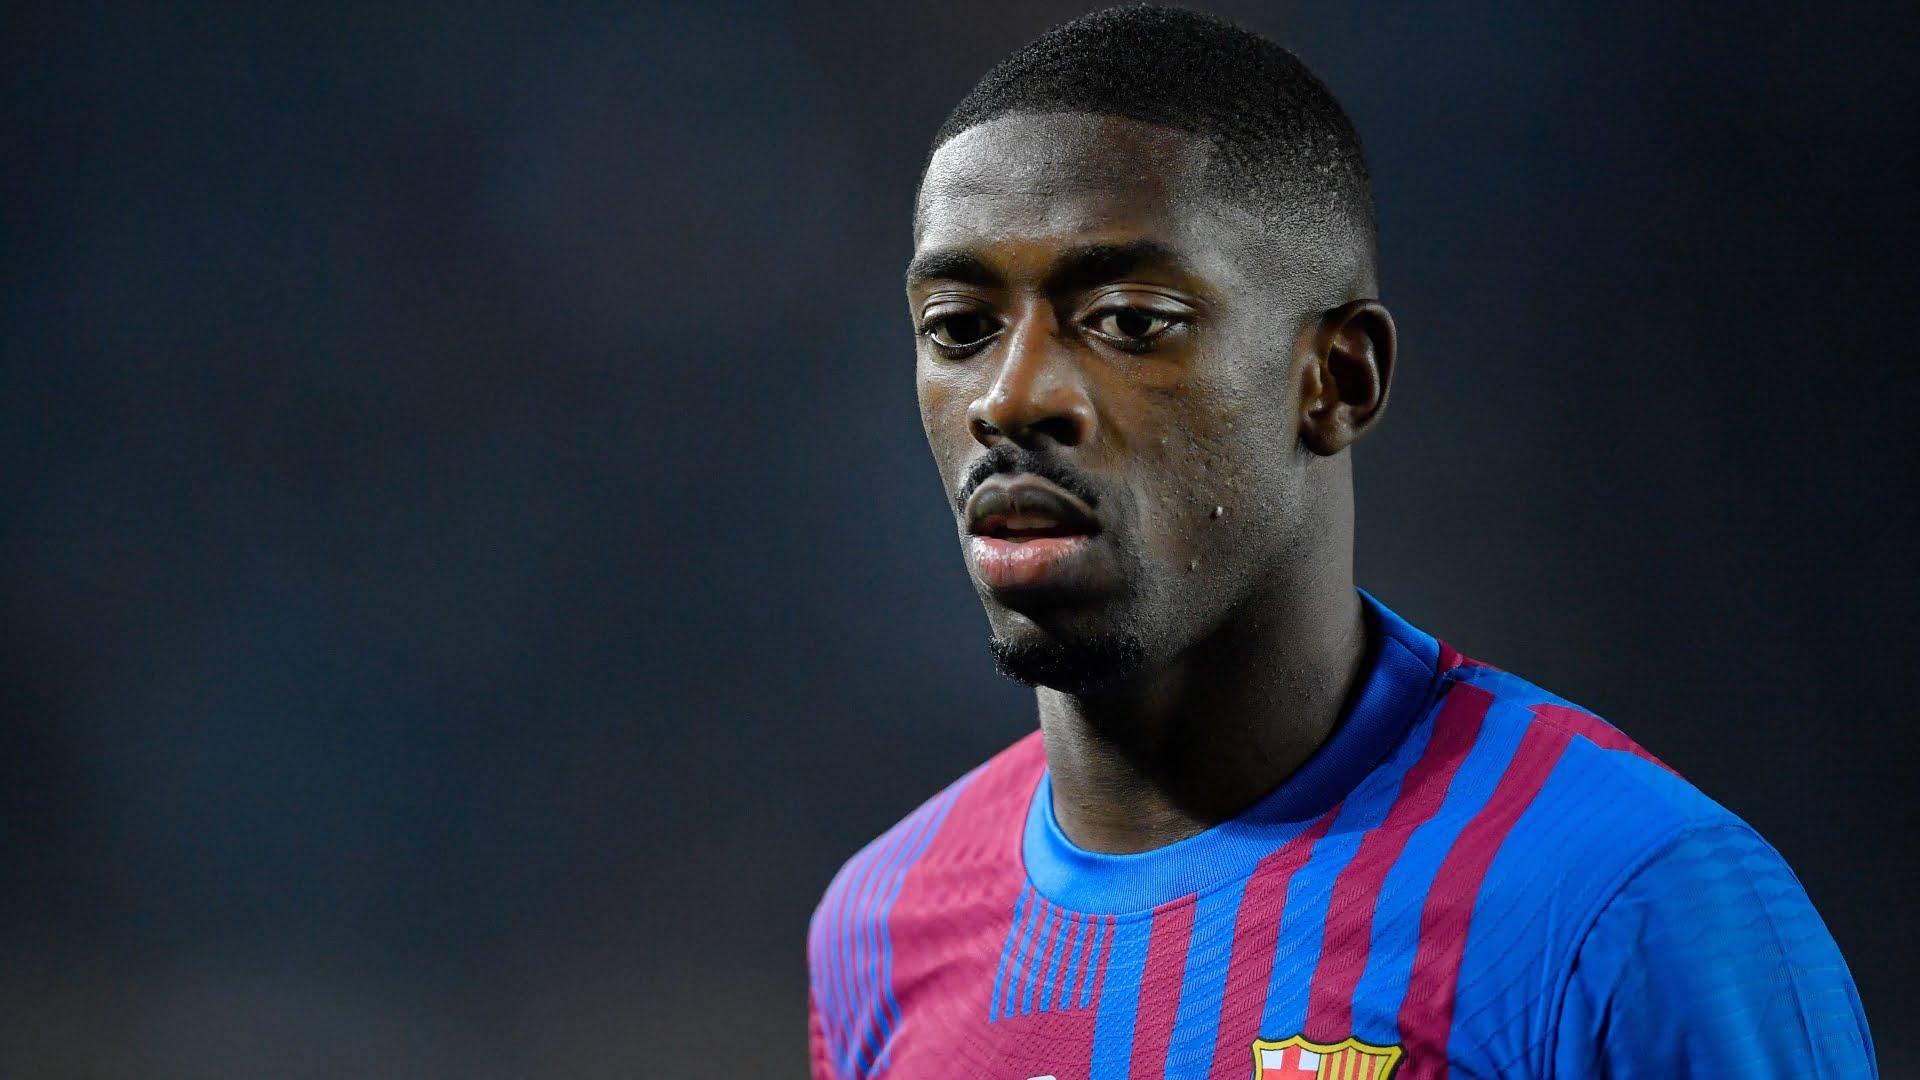 Dembele reveals player he wants to play with regularly